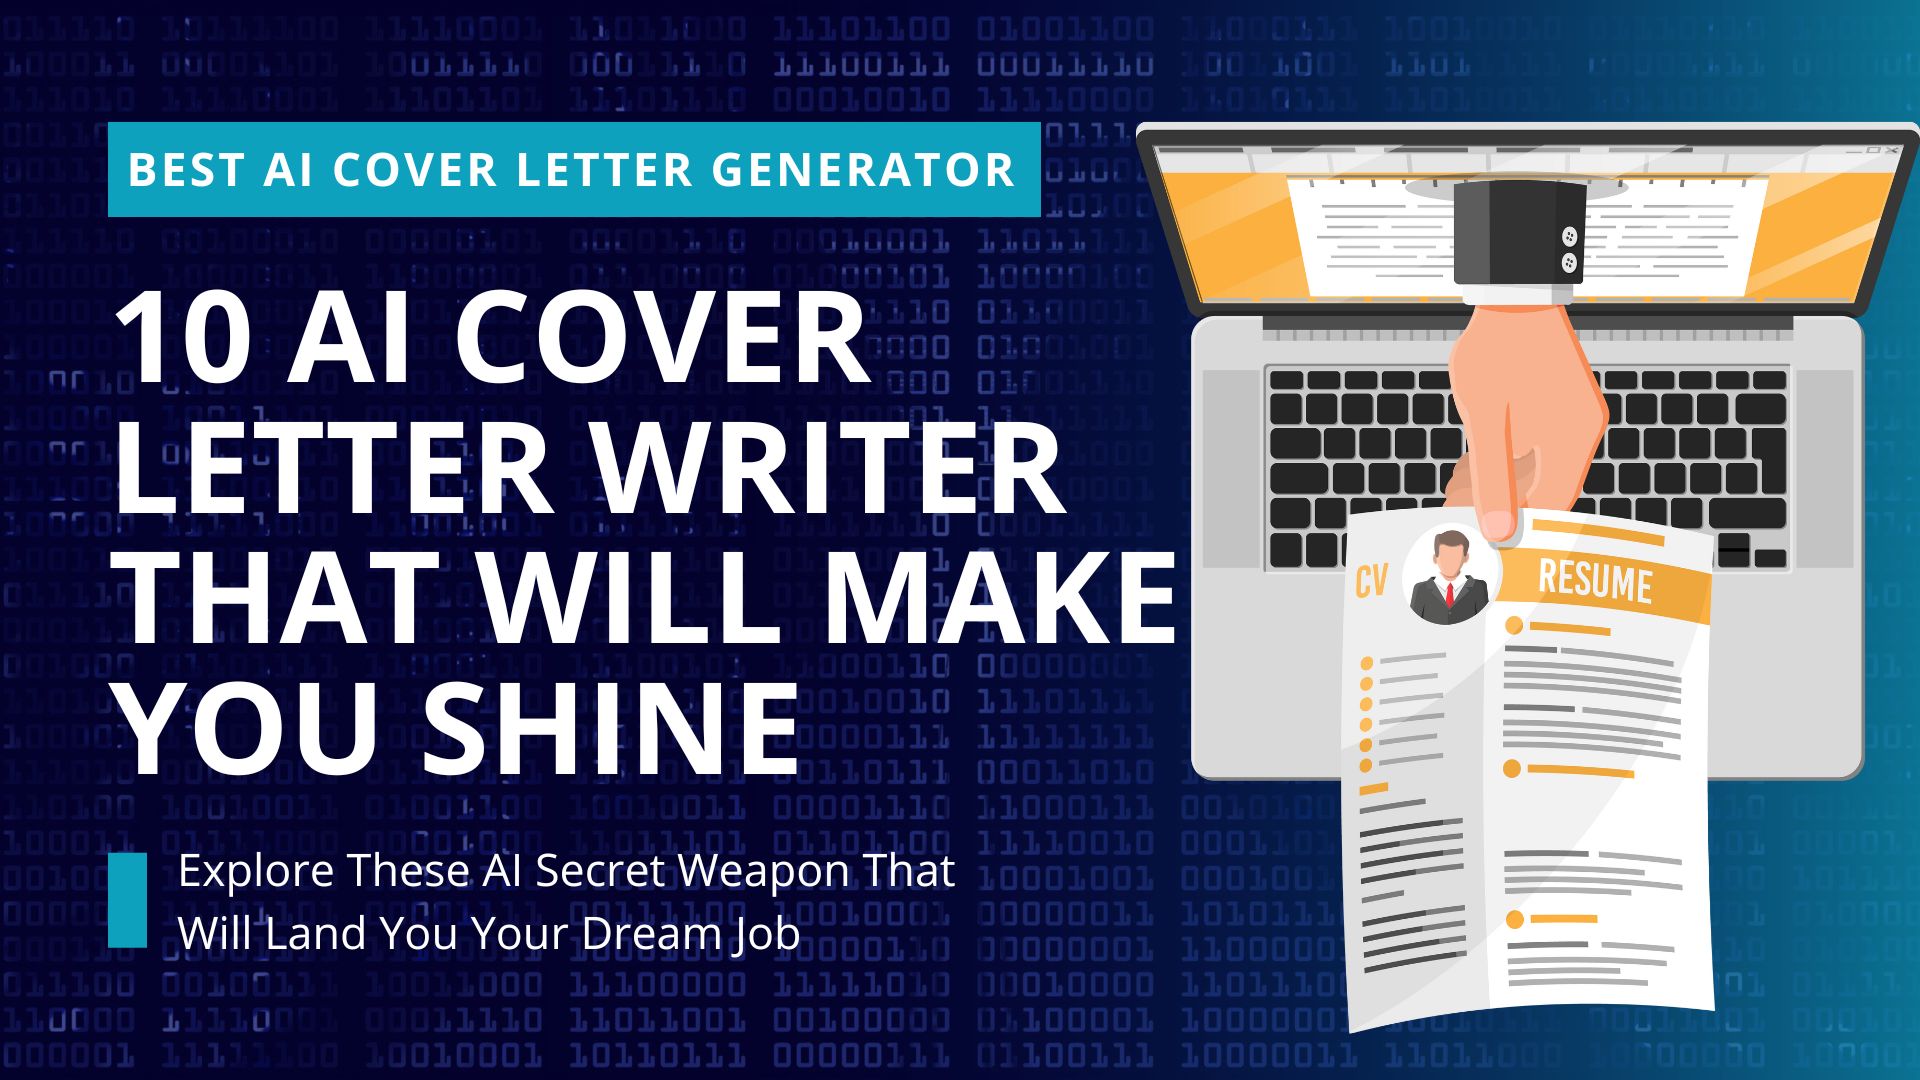 Best AI Cover Letter Generator